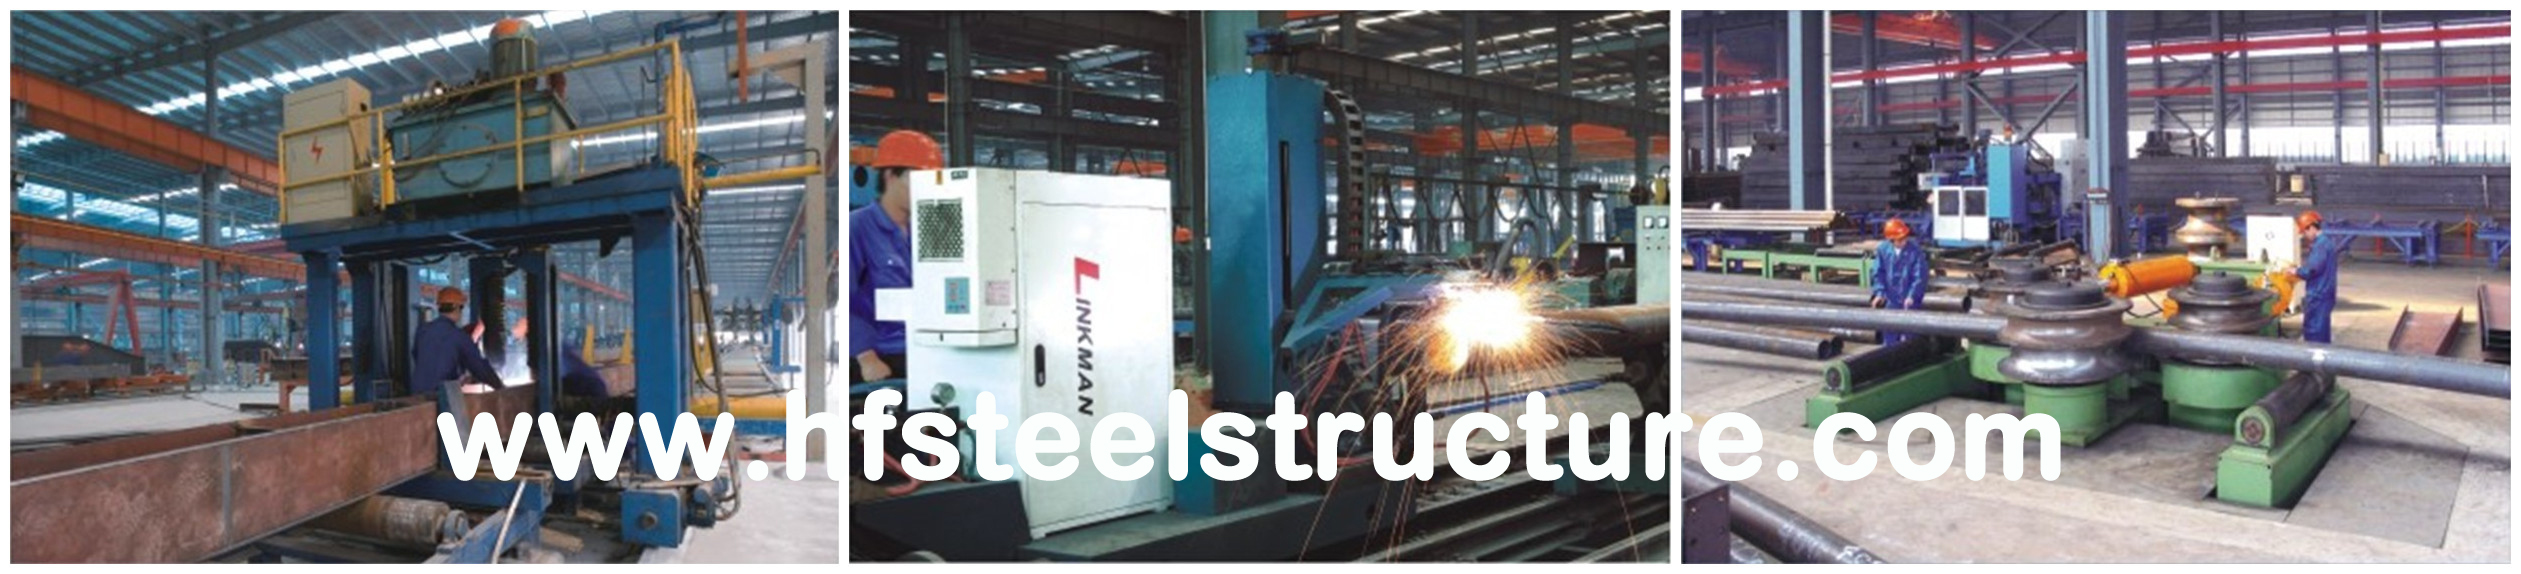 OEM Galvanized Structural Steel Fabrications For Food And Other Processing Industries